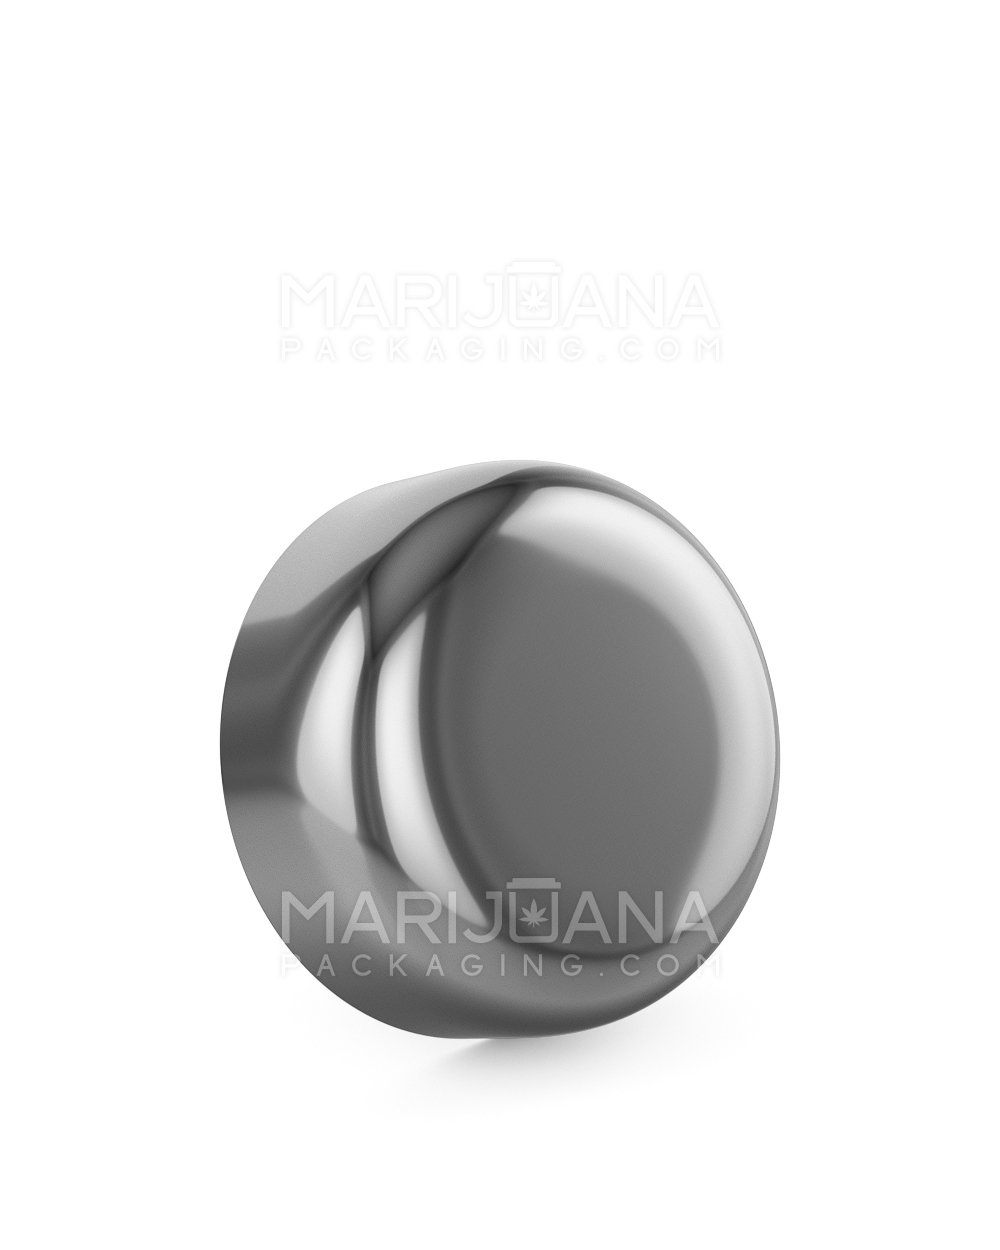 Child Resistant | Dome Push Down & Turn Plastic Caps w/ Foam Liner | 53mm - Glossy Silver - 120 Count - 1